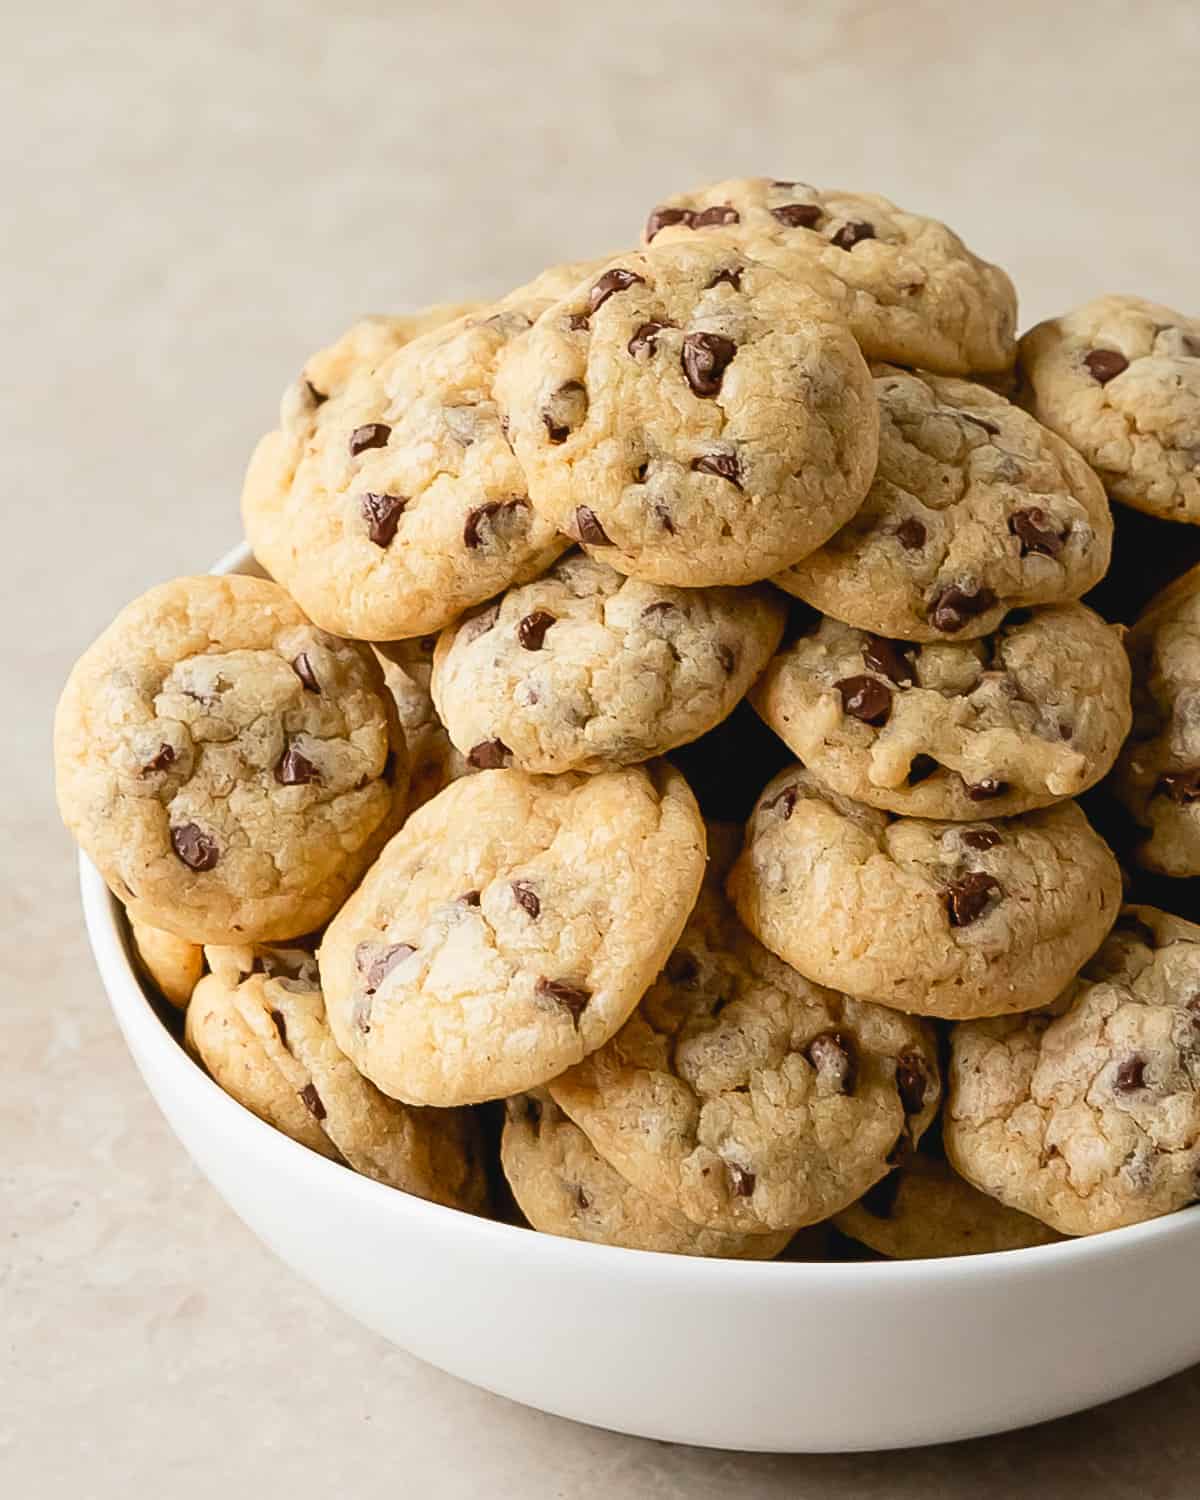 These mini chocolate chip cookies are tiny,  bite sized cookies with lightly crisp, buttery edges with soft, chewy centers and tons of melty mini chocolate chips. This recipe for these mini cookies uses all the same ingredients of  classic chocolate chip cookies just baked into bite sized chocolate chip cookies.  Make these chocolate chip cookie bites in one bowl, with no chilling time needed. 